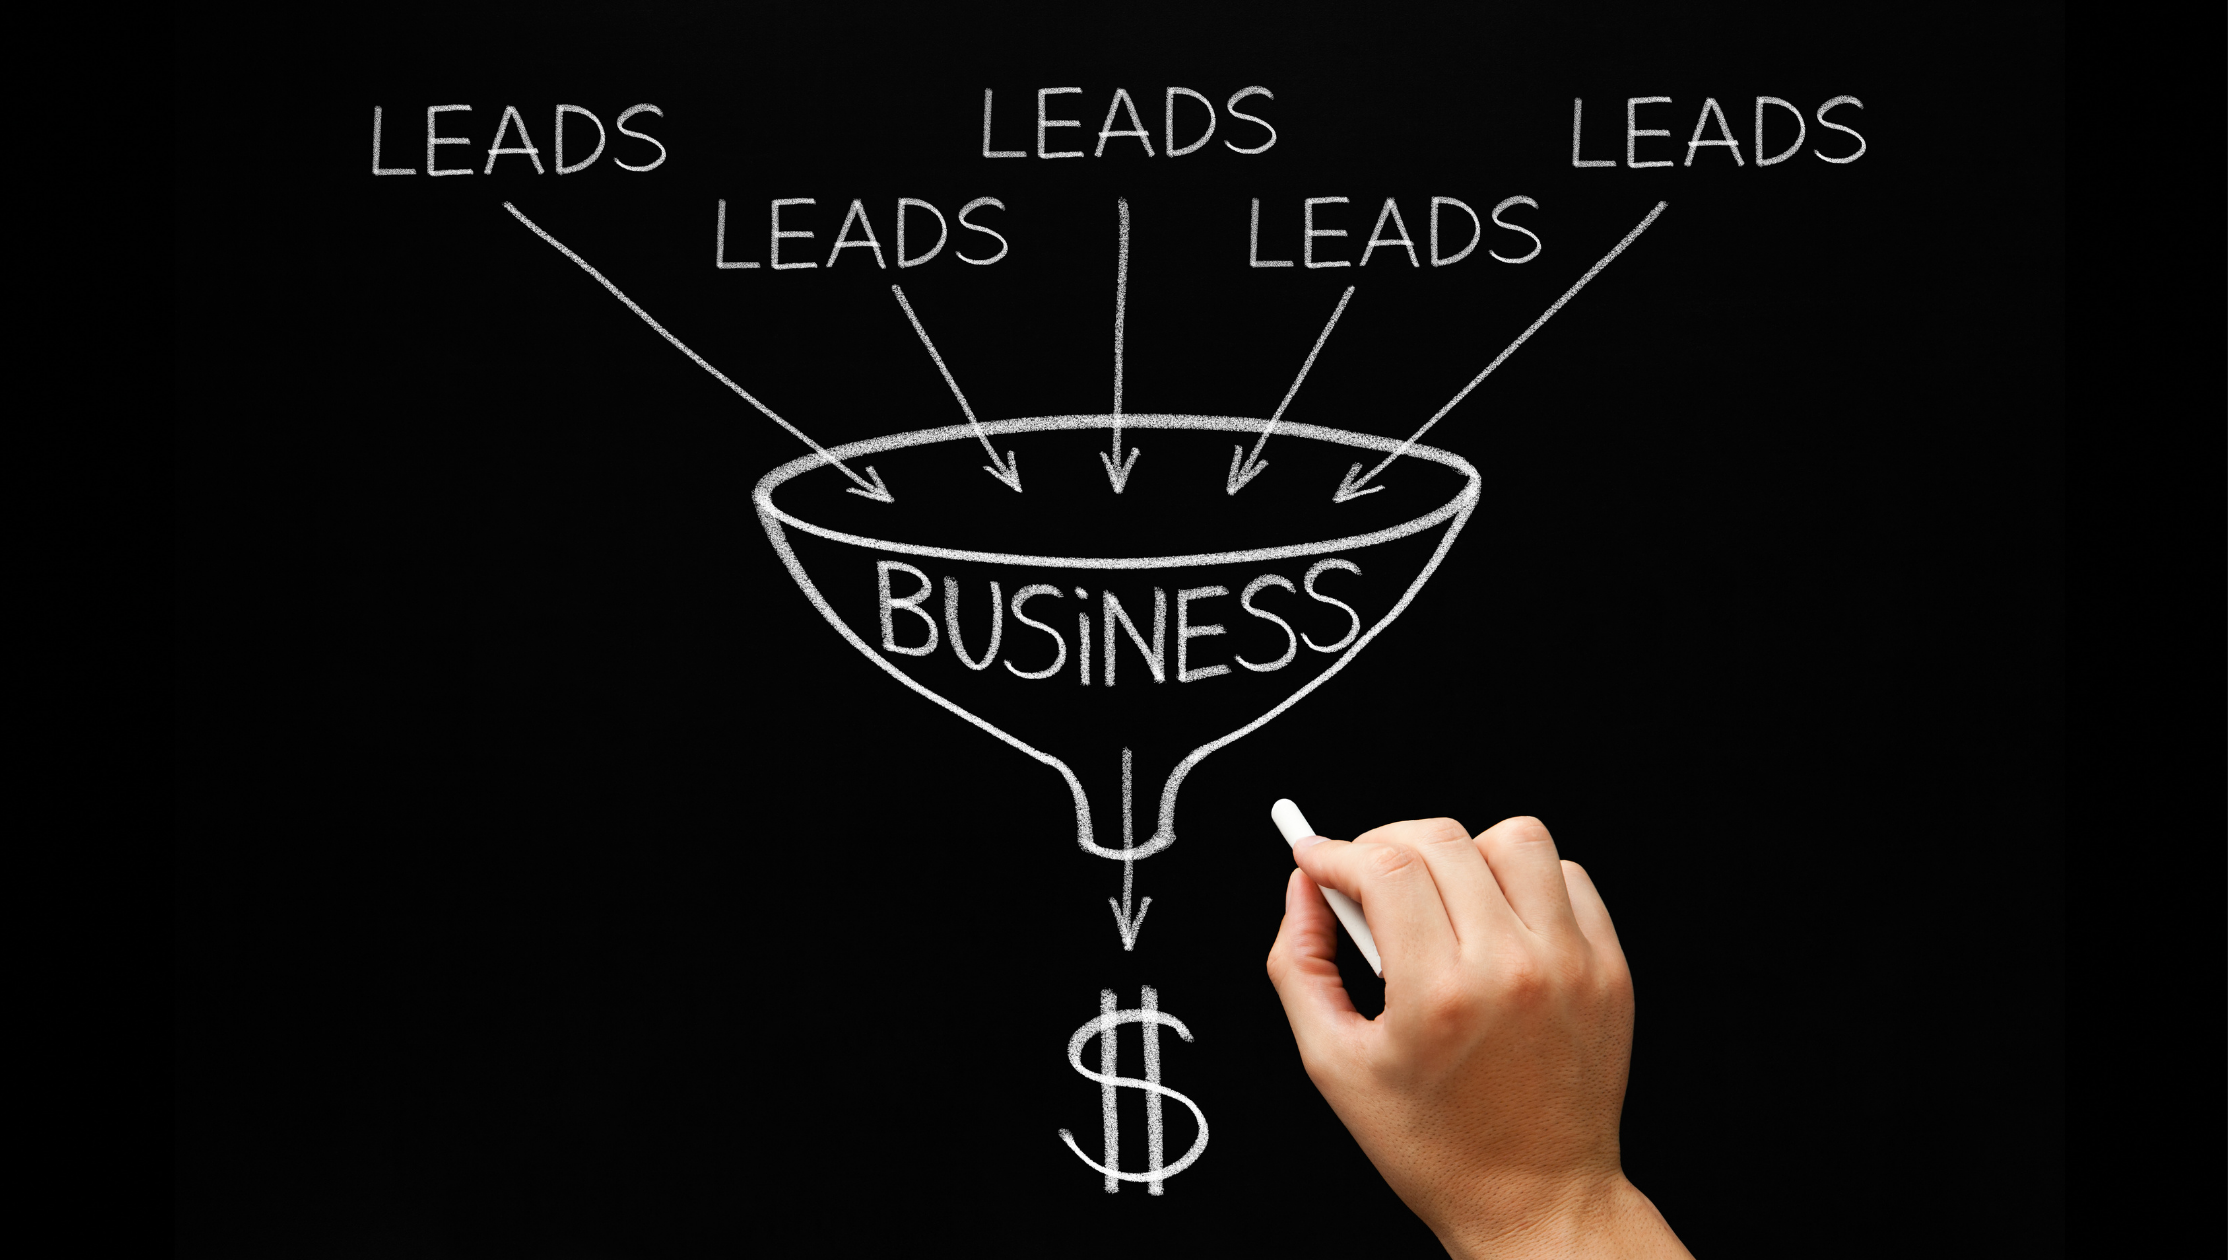 7 Ways to Generate New Business Leads [+ VIDEO]